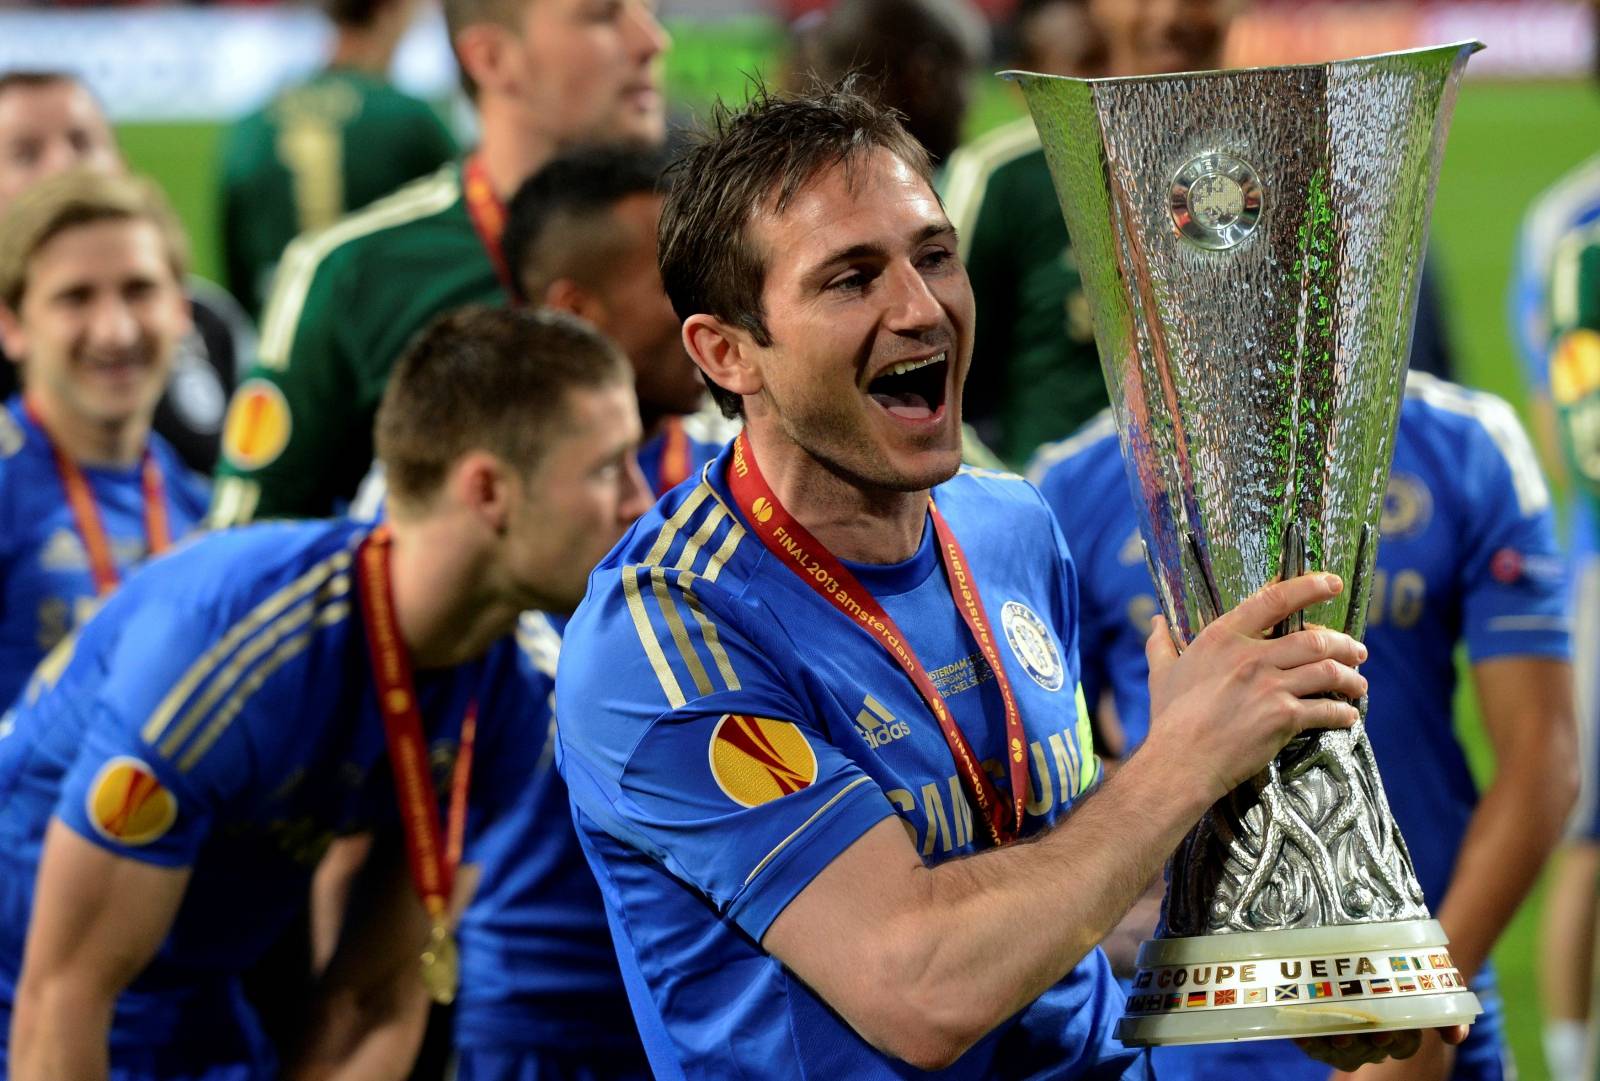 FILE PHOTO: Chelsea player Frank Lampard holds the trophy after defeating Benfica in the Europa League final soccer match at the Amsterdam Arena